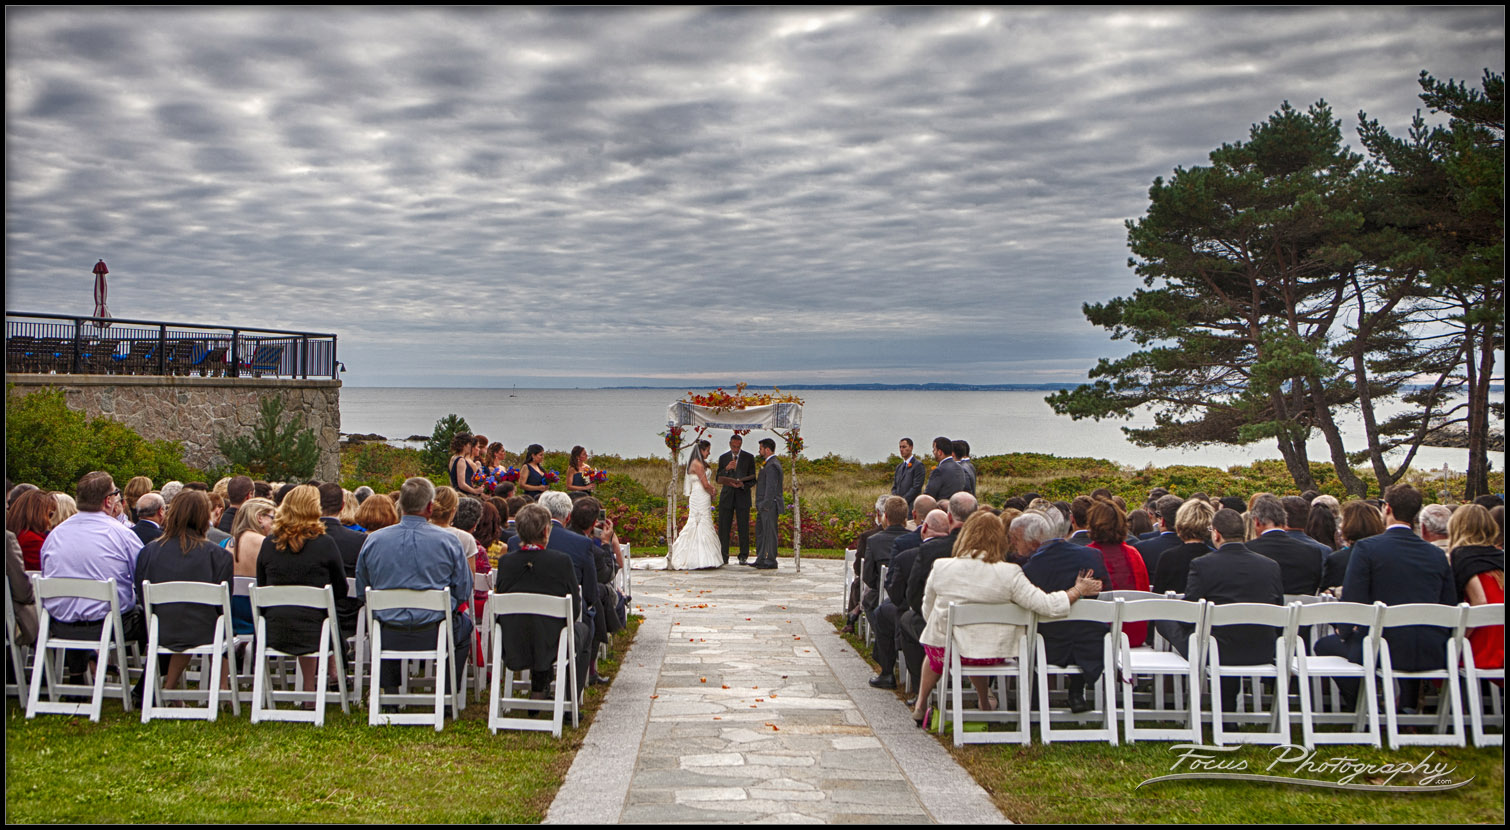 Wedding ceremony at Colony Hotel in Kennebunkport, Maine